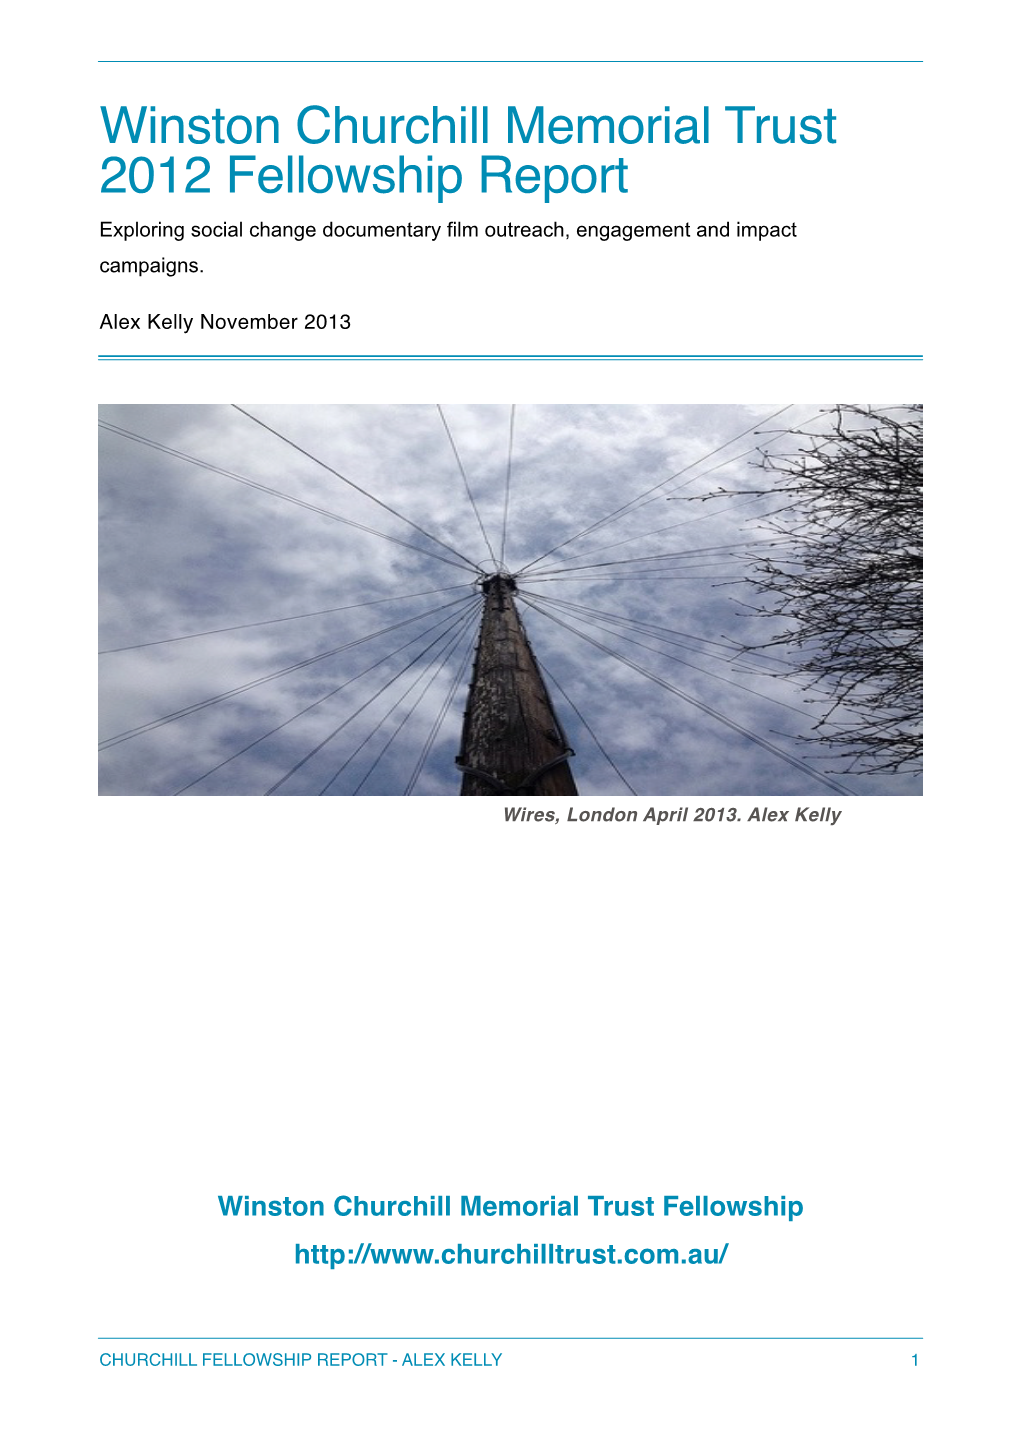 Winston Churchill Memorial Trust 2012 Fellowship Report� Exploring Social Change Documentary Film Outreach, Engagement and Impact Campaigns